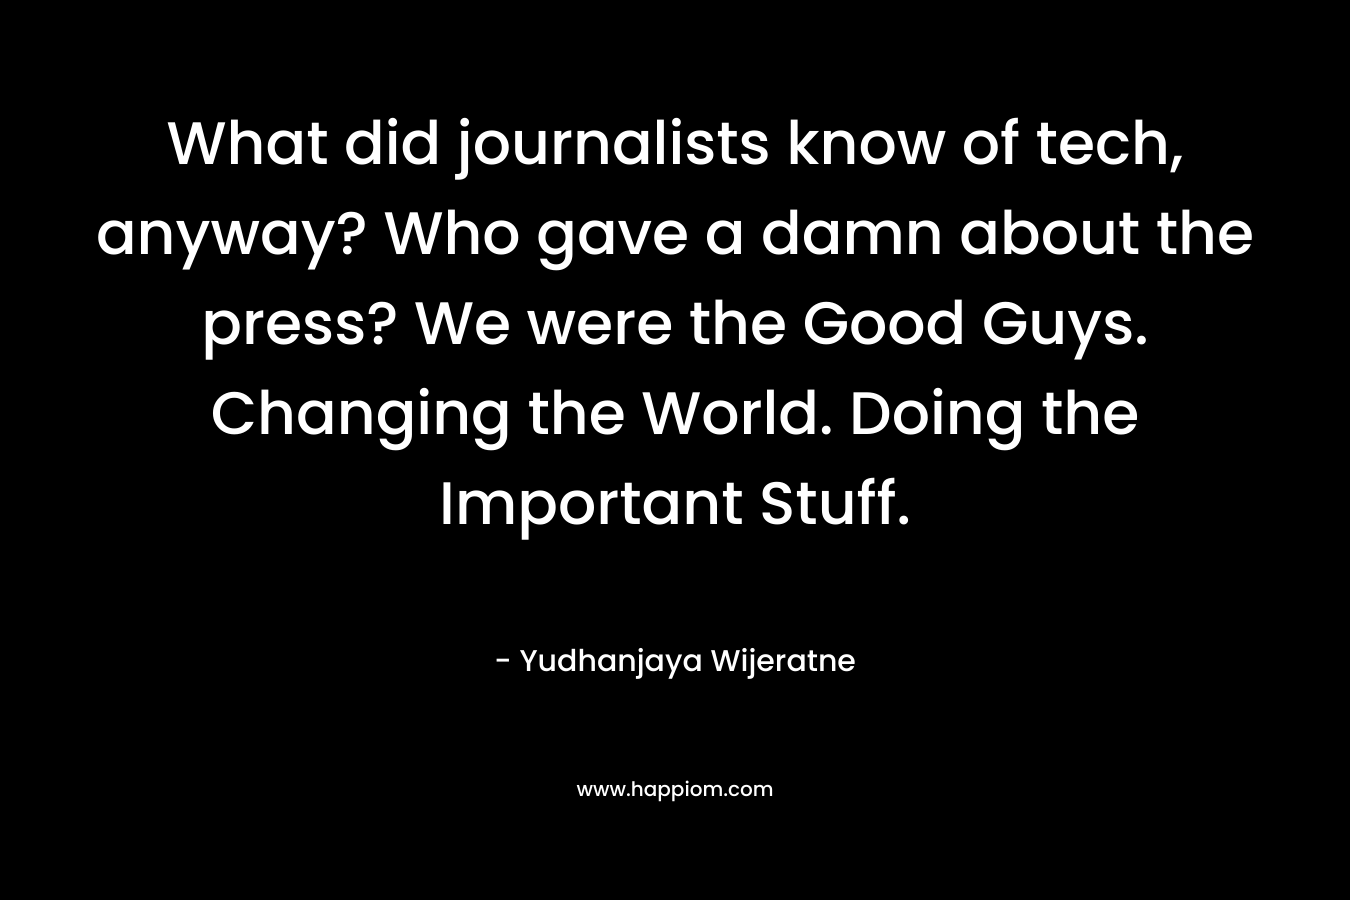 What did journalists know of tech, anyway? Who gave a damn about the press? We were the Good Guys. Changing the World. Doing the Important Stuff.